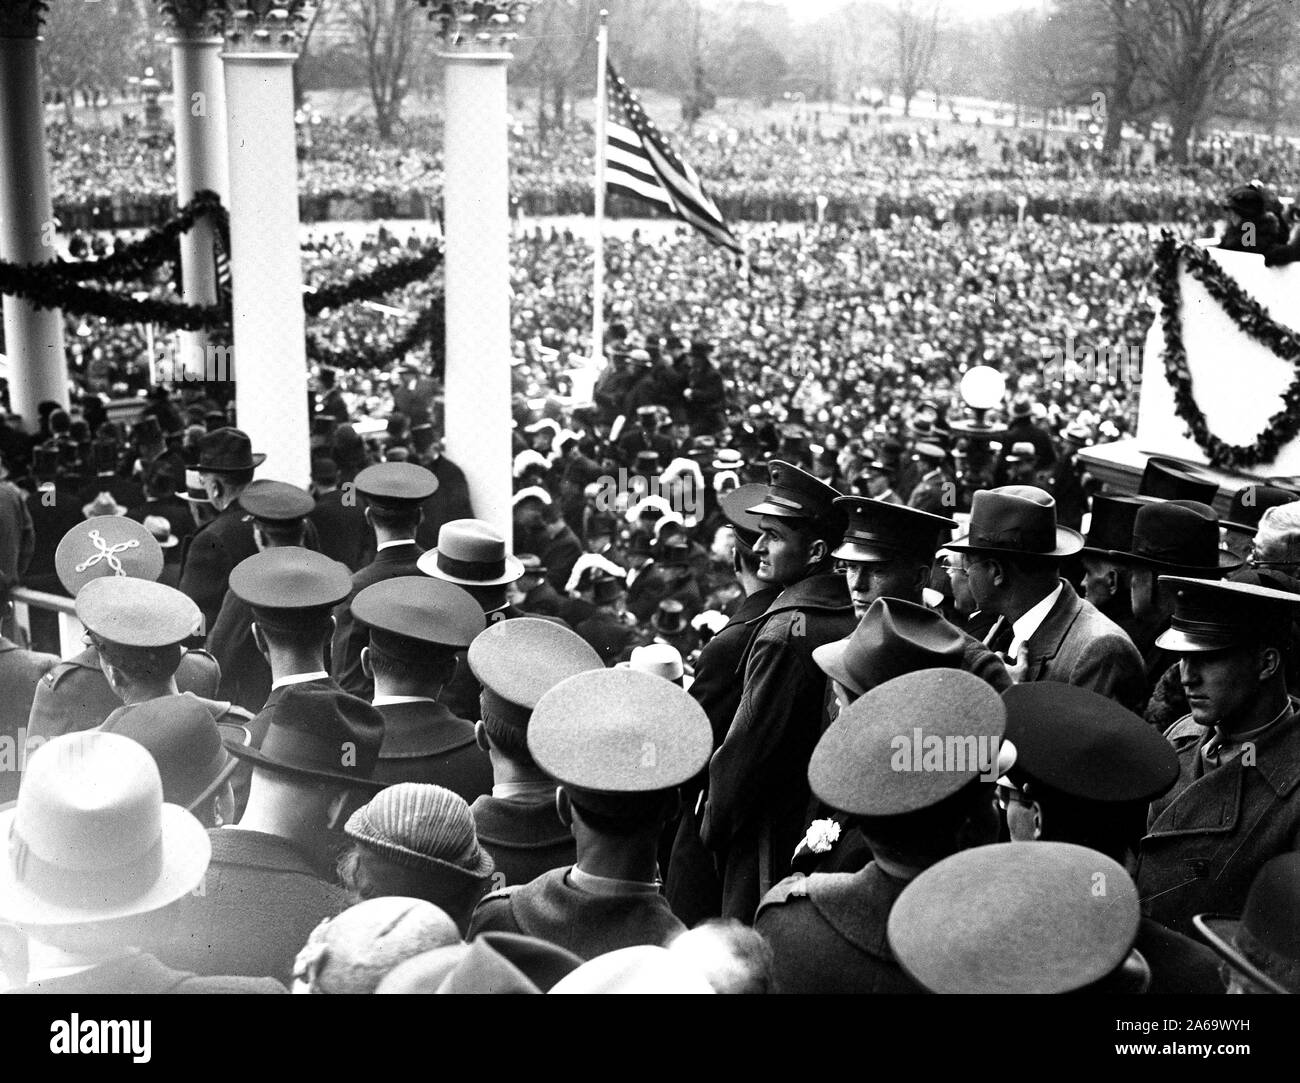 Franklin D. Roosevelt - Inauguration of Franklin D. Roosevelt. Crowd outside U.S. Capitol, Washington, D.C. ca. March 4, 1933 Stock Photo